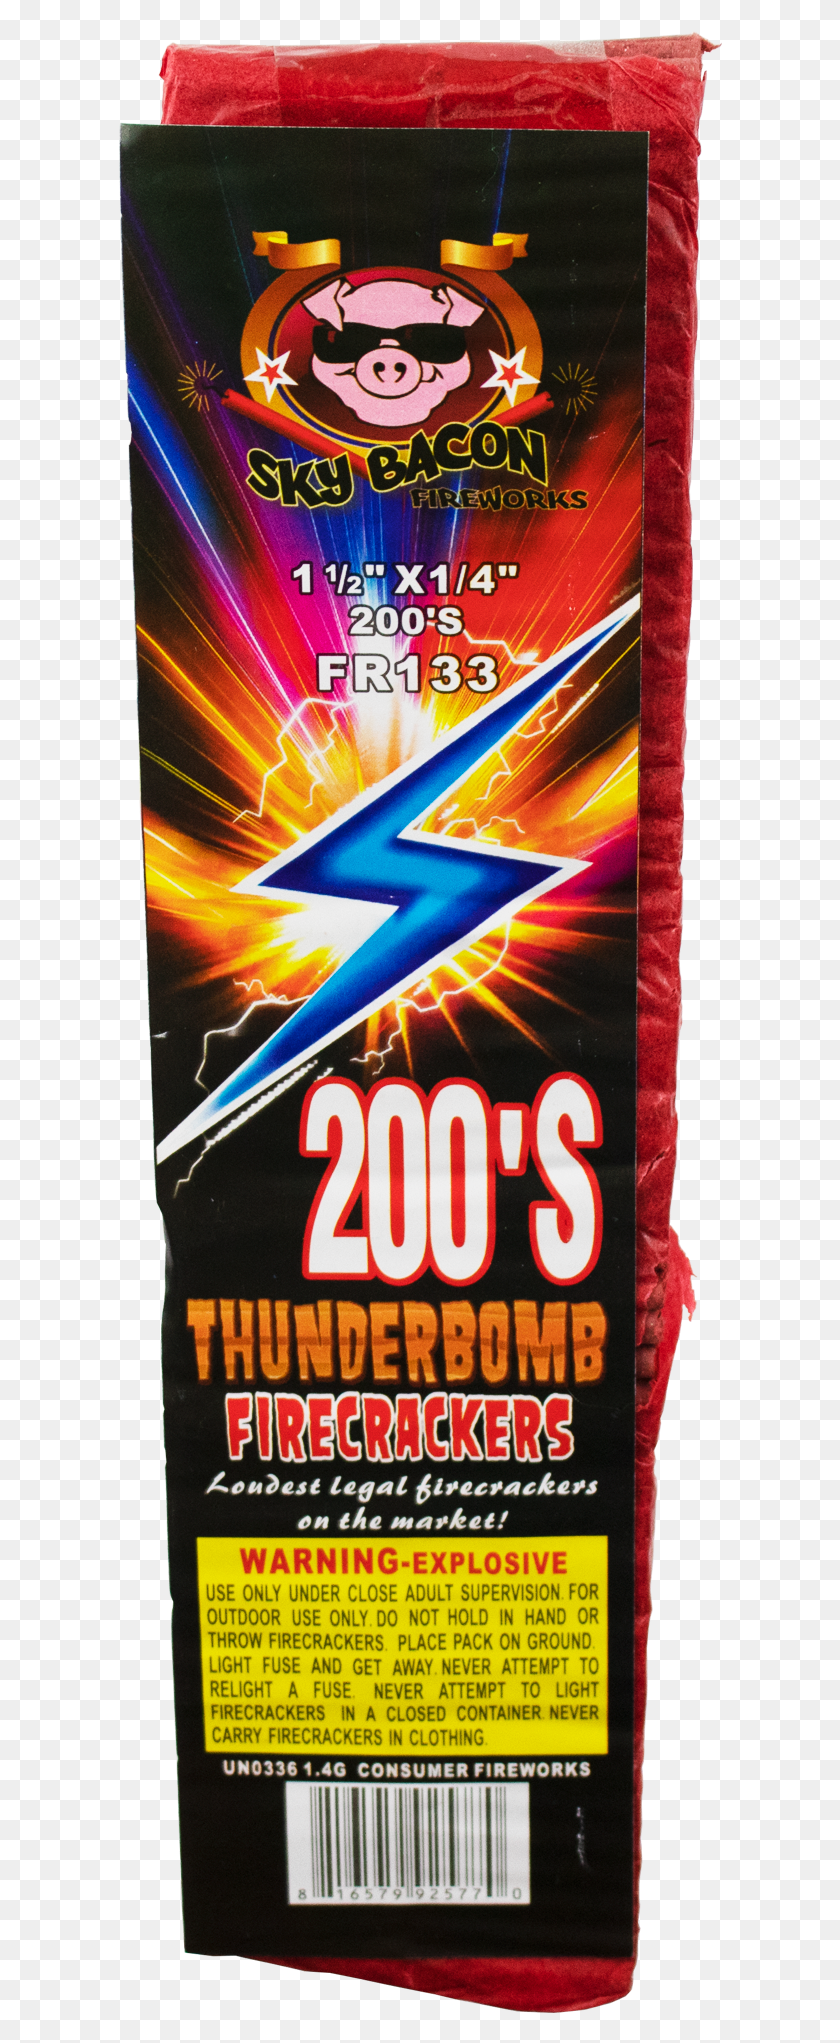 604x1983 Thunderbomb Firecrackers 200s Multimedia Software, Poster, Advertisement, Flyer HD PNG Download